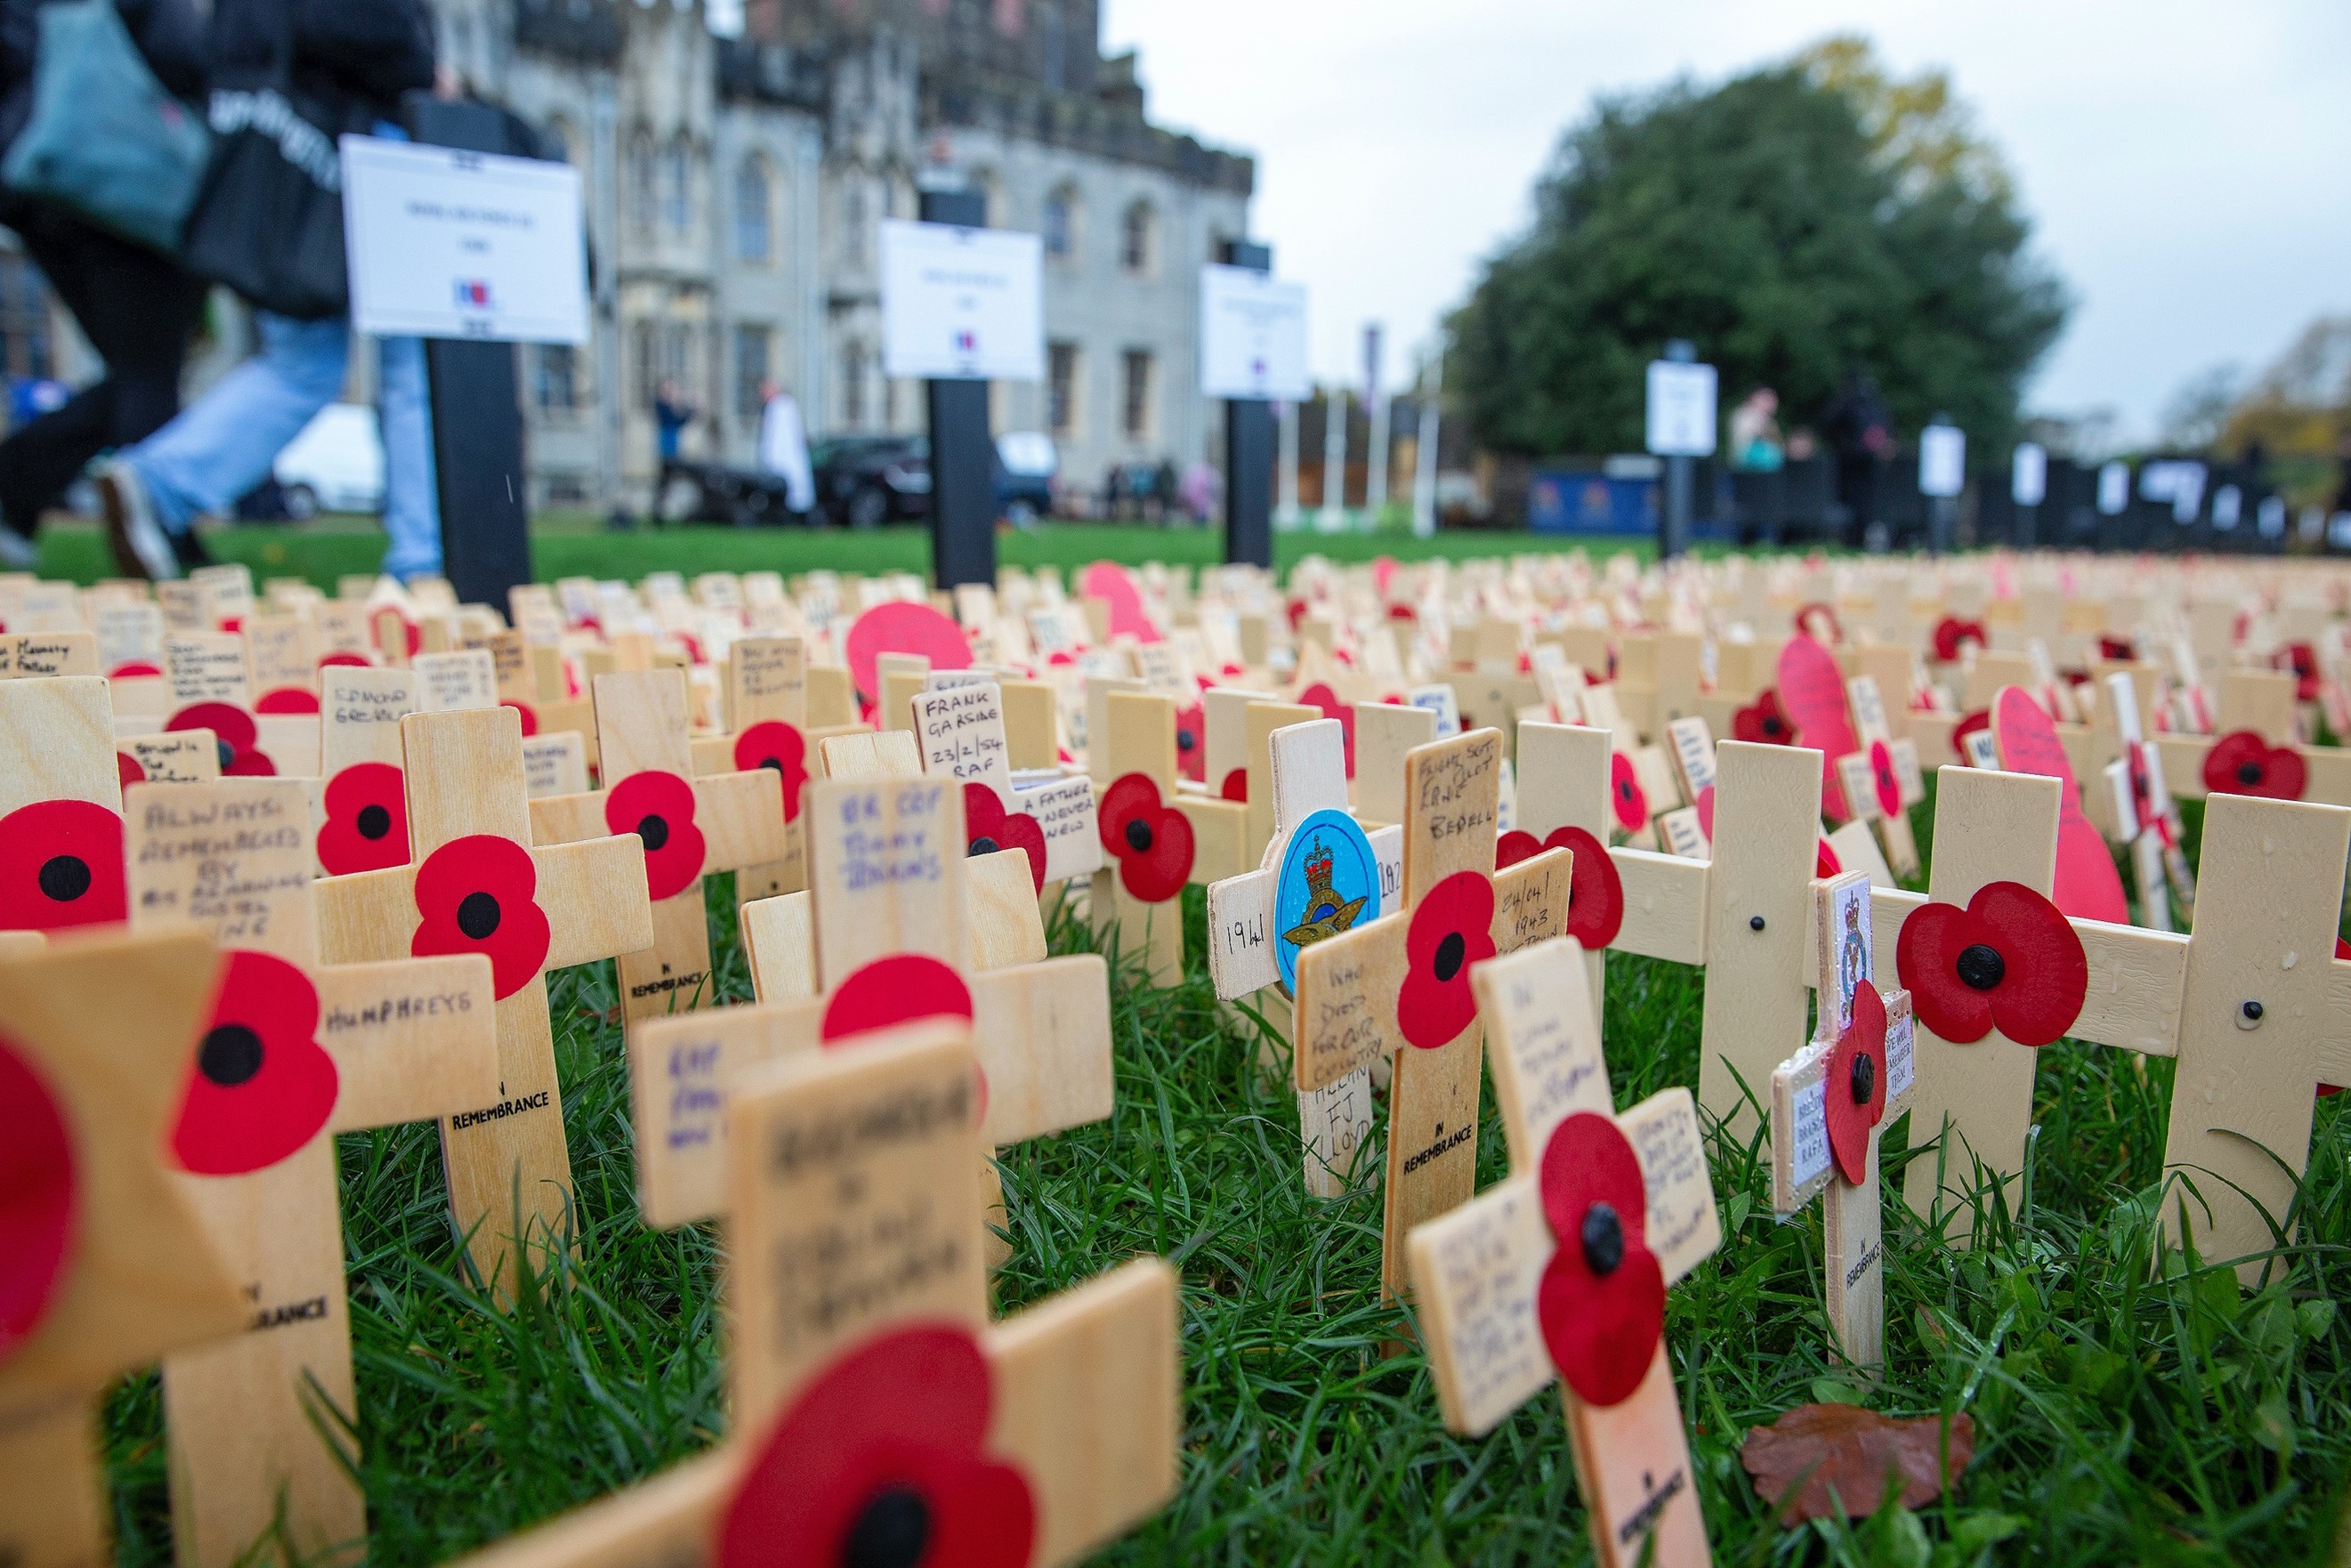 Image shows rows of poppy crosses in cemetery.